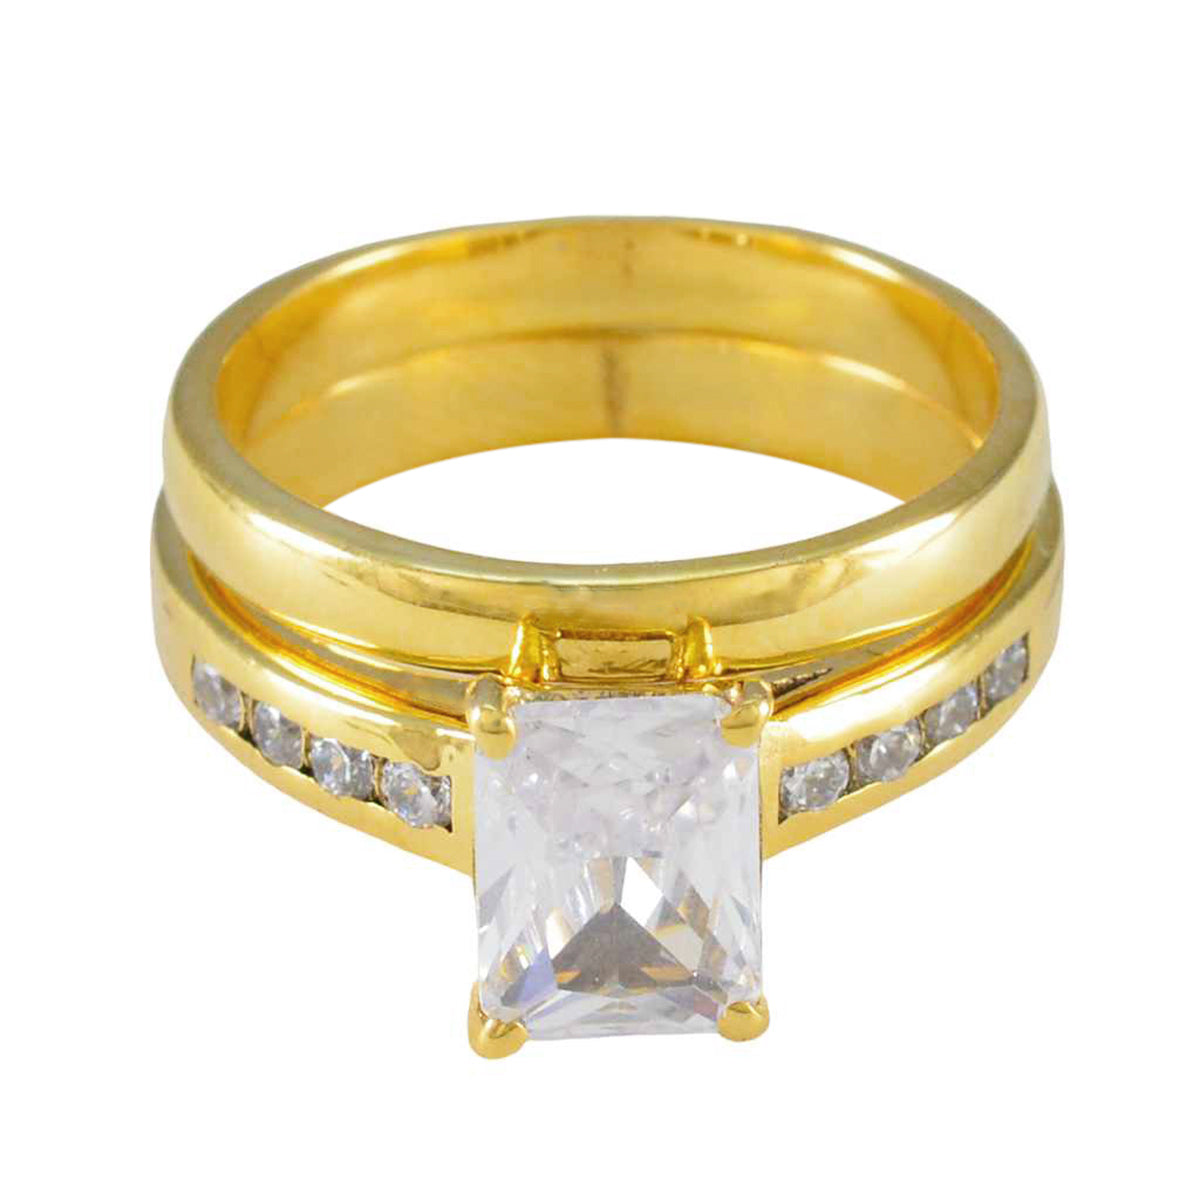 Riyo Perfect Silver Ring With Yellow Gold Plating White CZ Stone Octagon Shape Prong Setting Ring